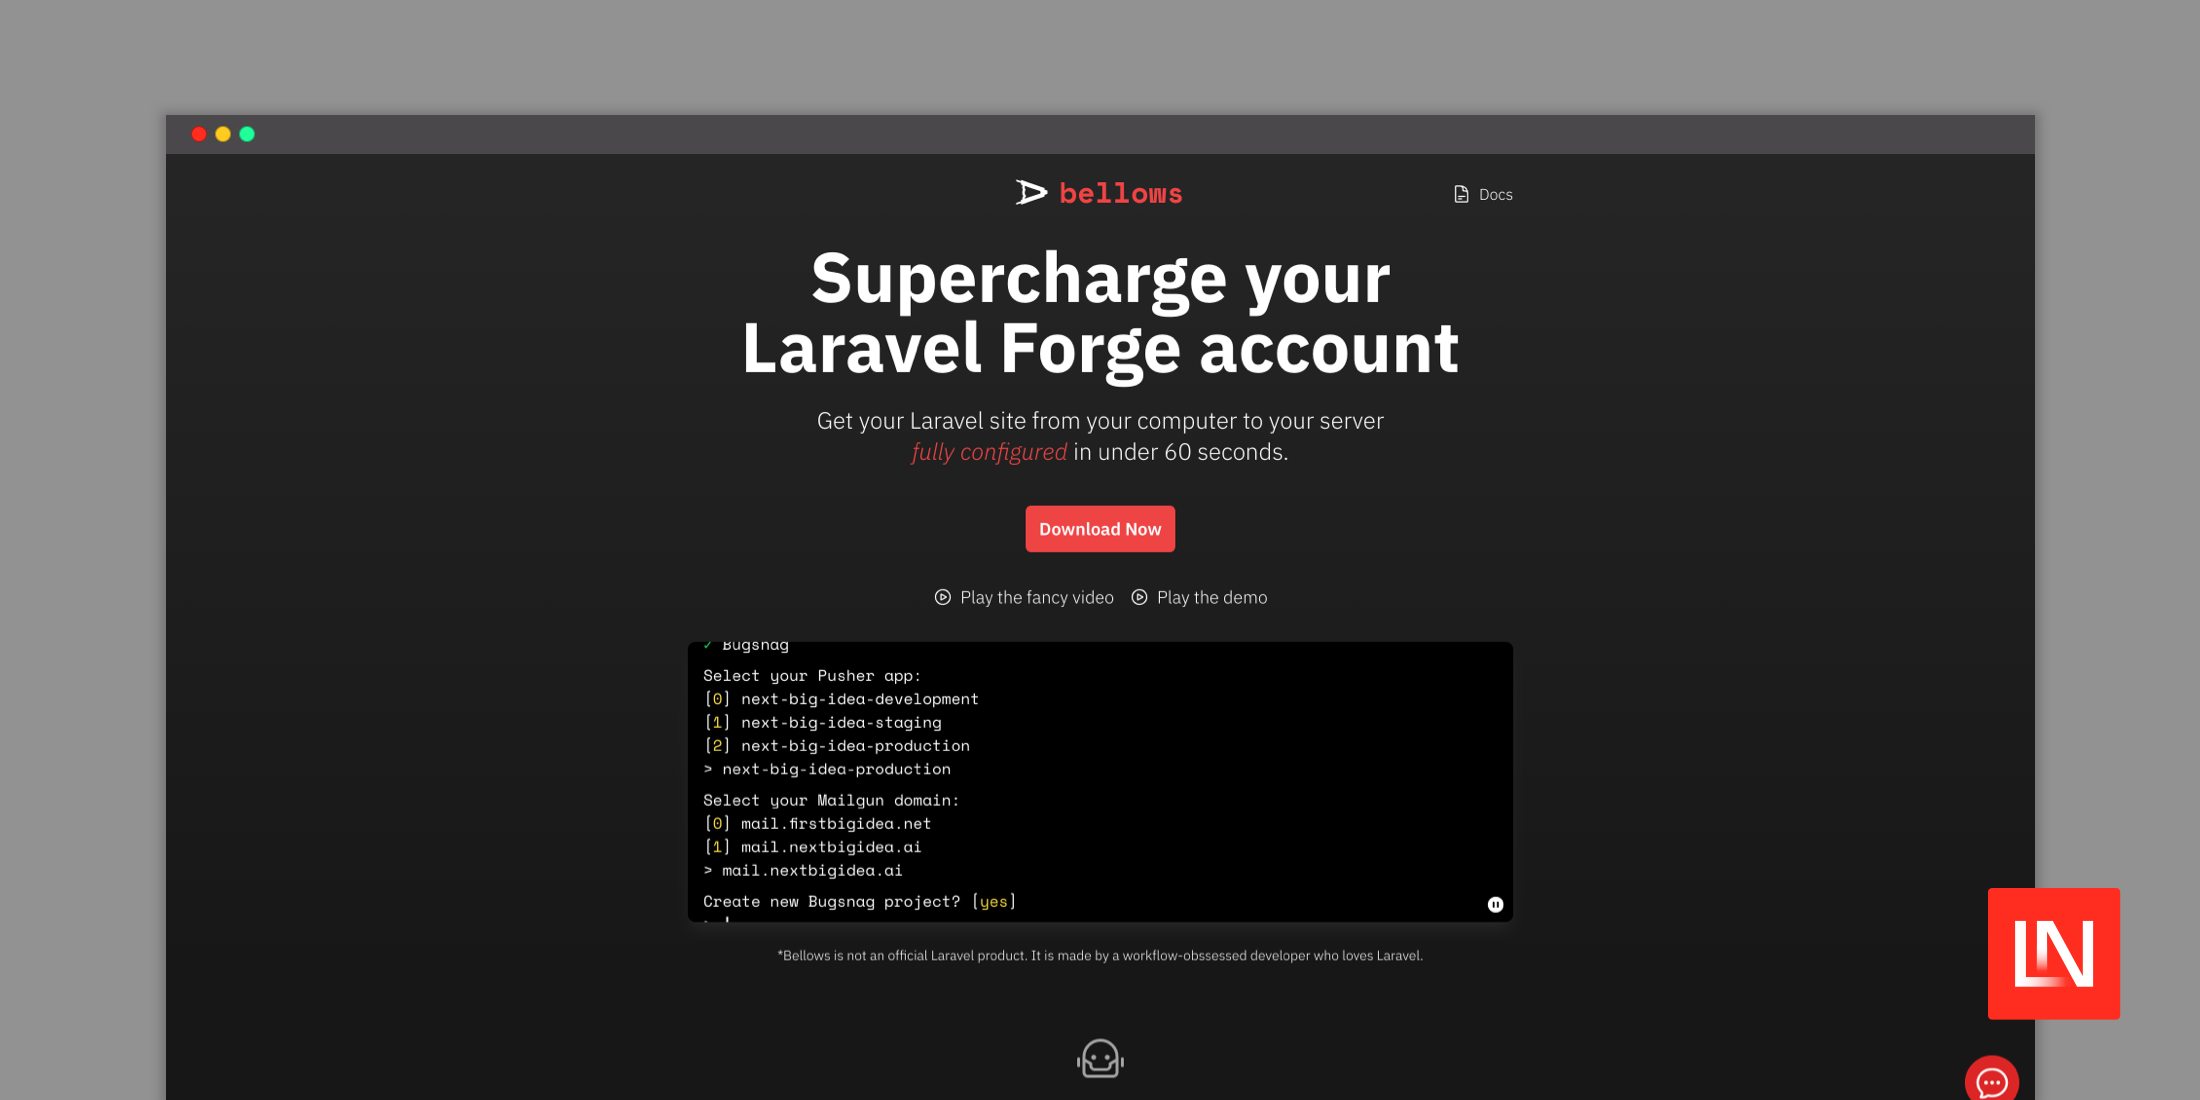 Bellows: Supercharge your Laravel Forge account image